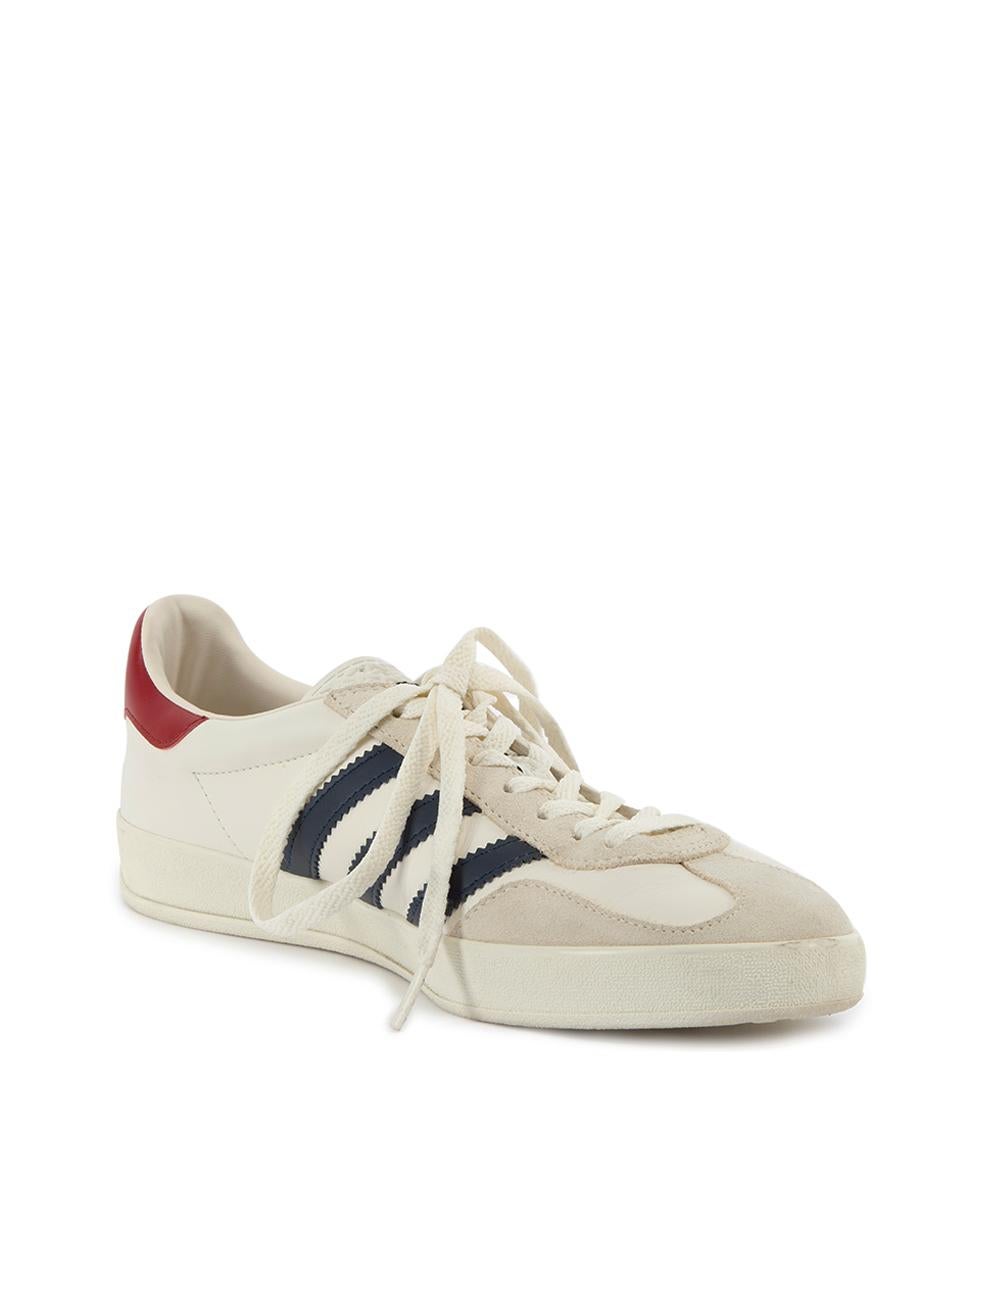 CONDITION is Very good. Minimal wear to sneakers is evident. Minimal wear to midsoles and there is some light creasing to the toe point on this used Gucci x Adidas designer resale item. This item comes with the original dustbags. Details Adidas x